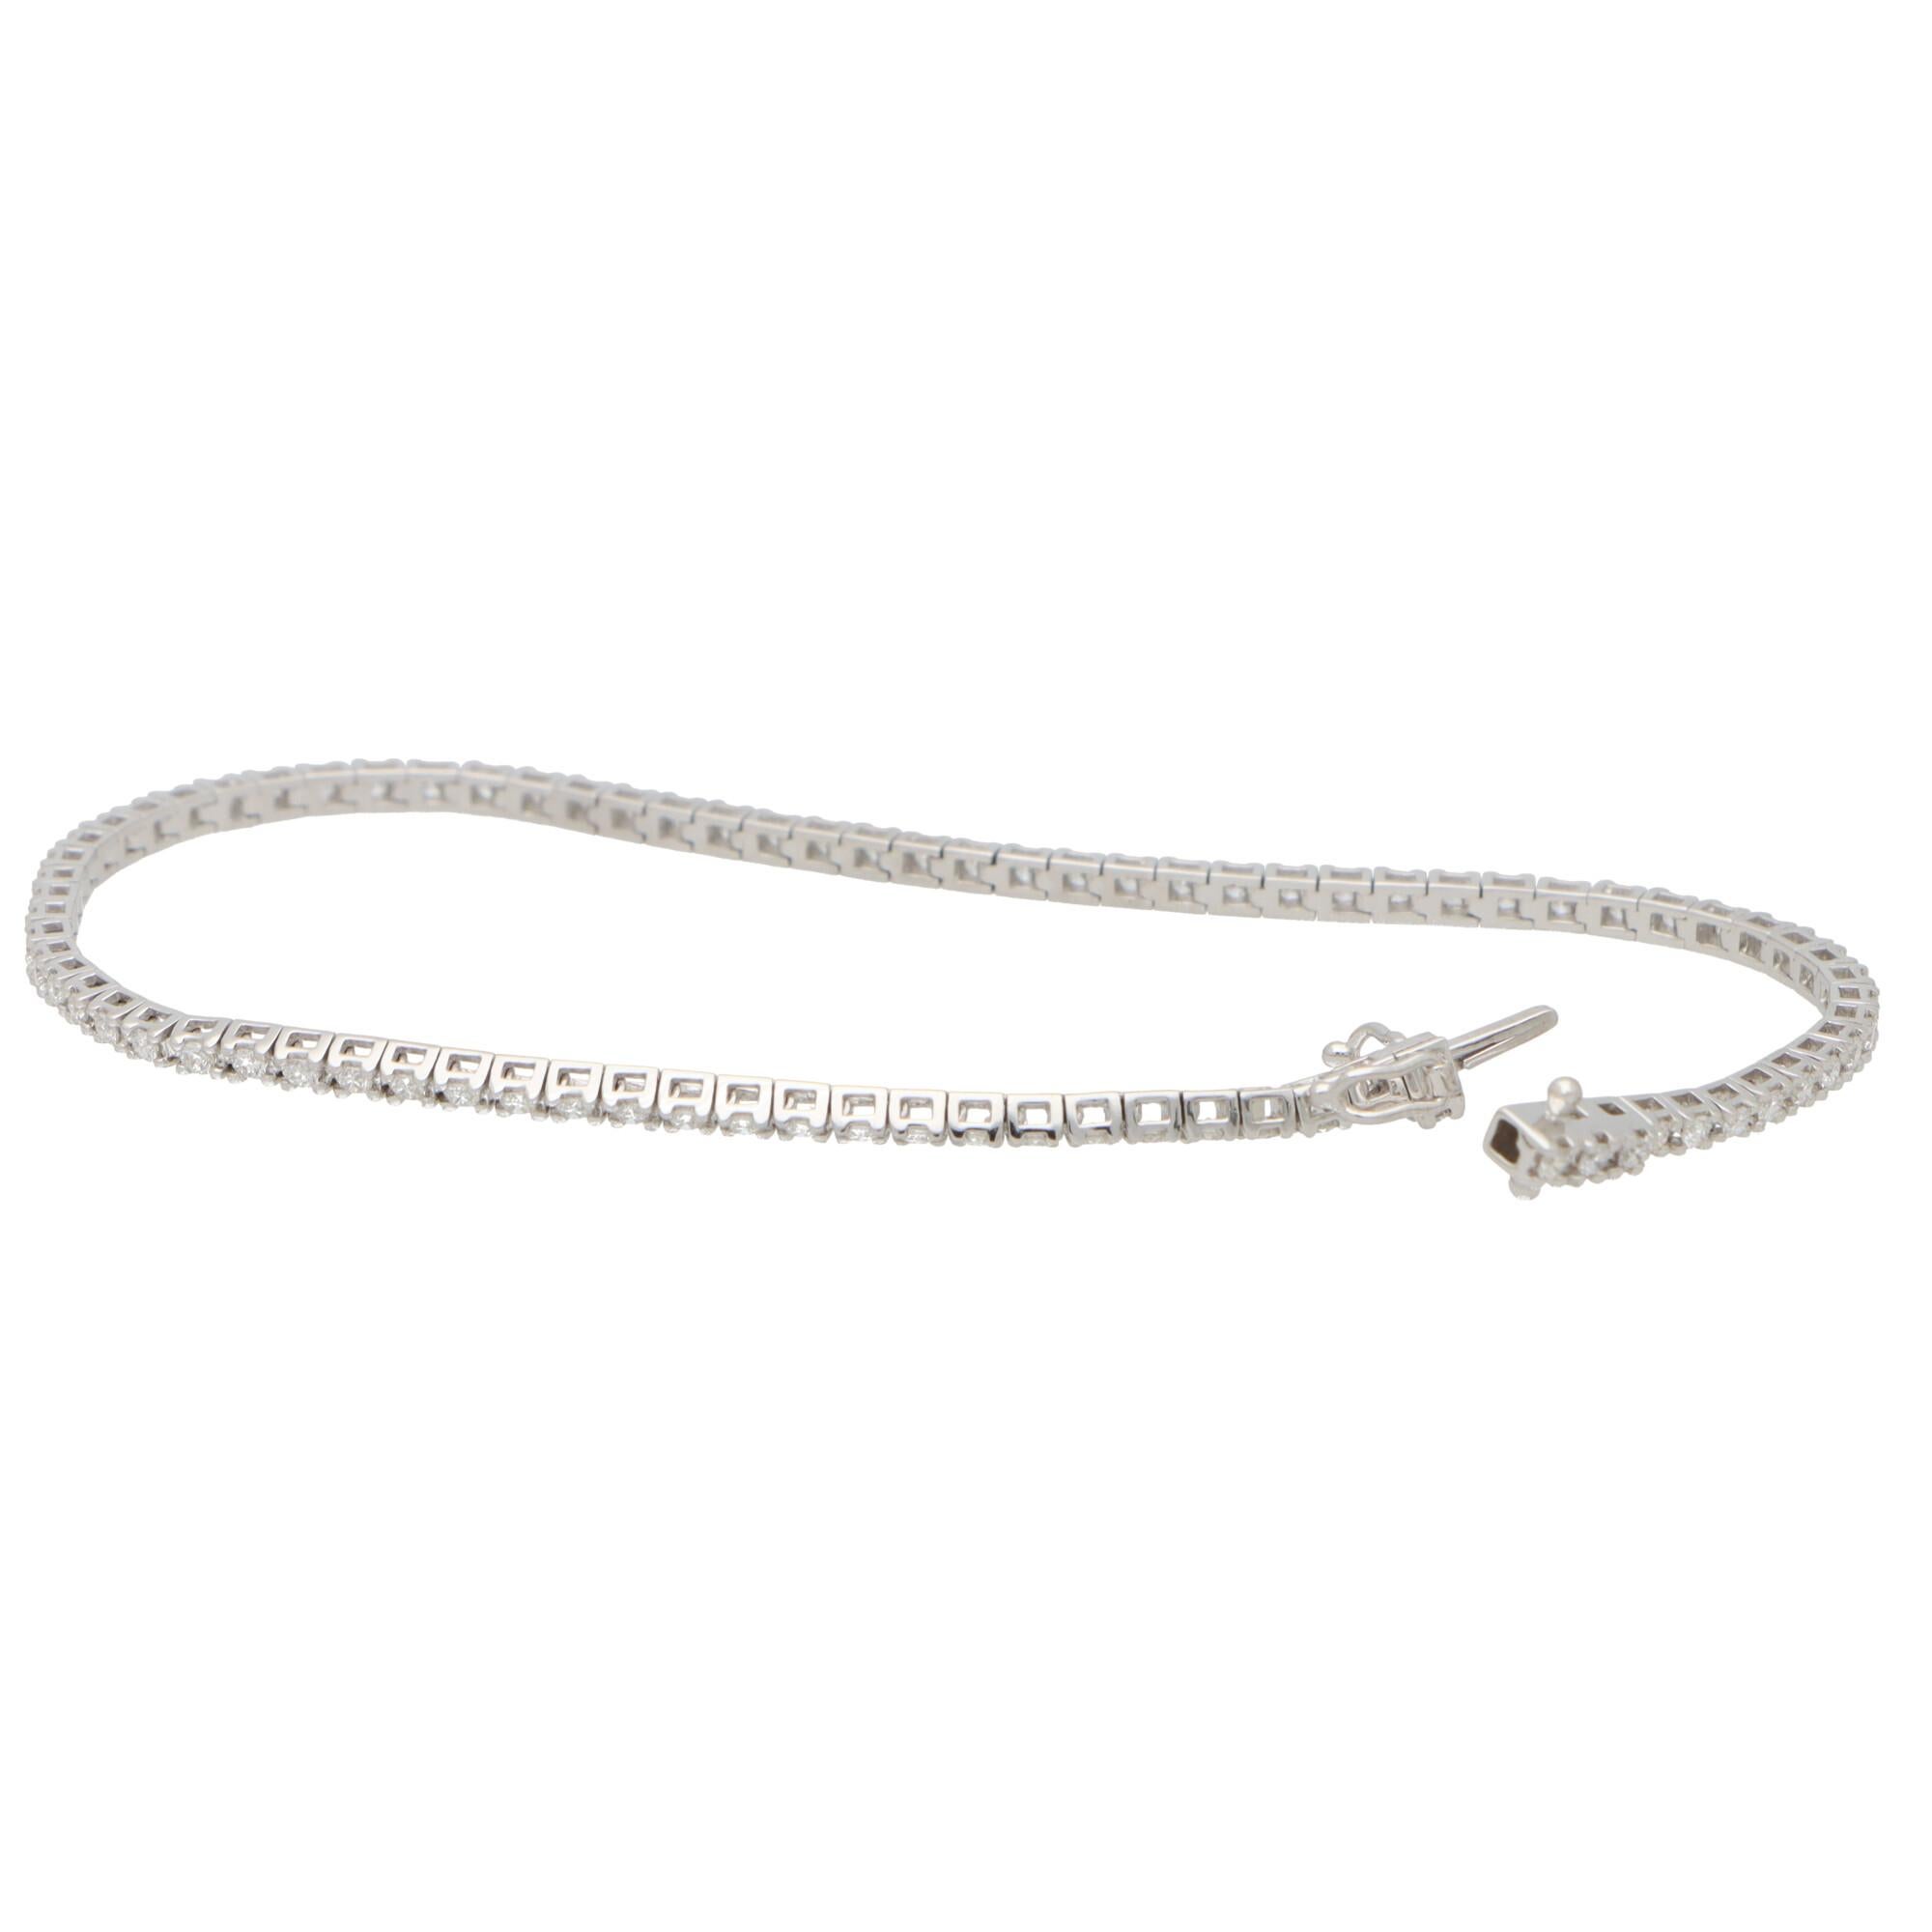  A lovely contemporary diamond line bracelet set in 18k white gold.

The bracelet is composed of a grand total of 83 round brilliant cut sparkly diamonds, all of which are claw set securely. 

Due to the links being articulated, this allows the